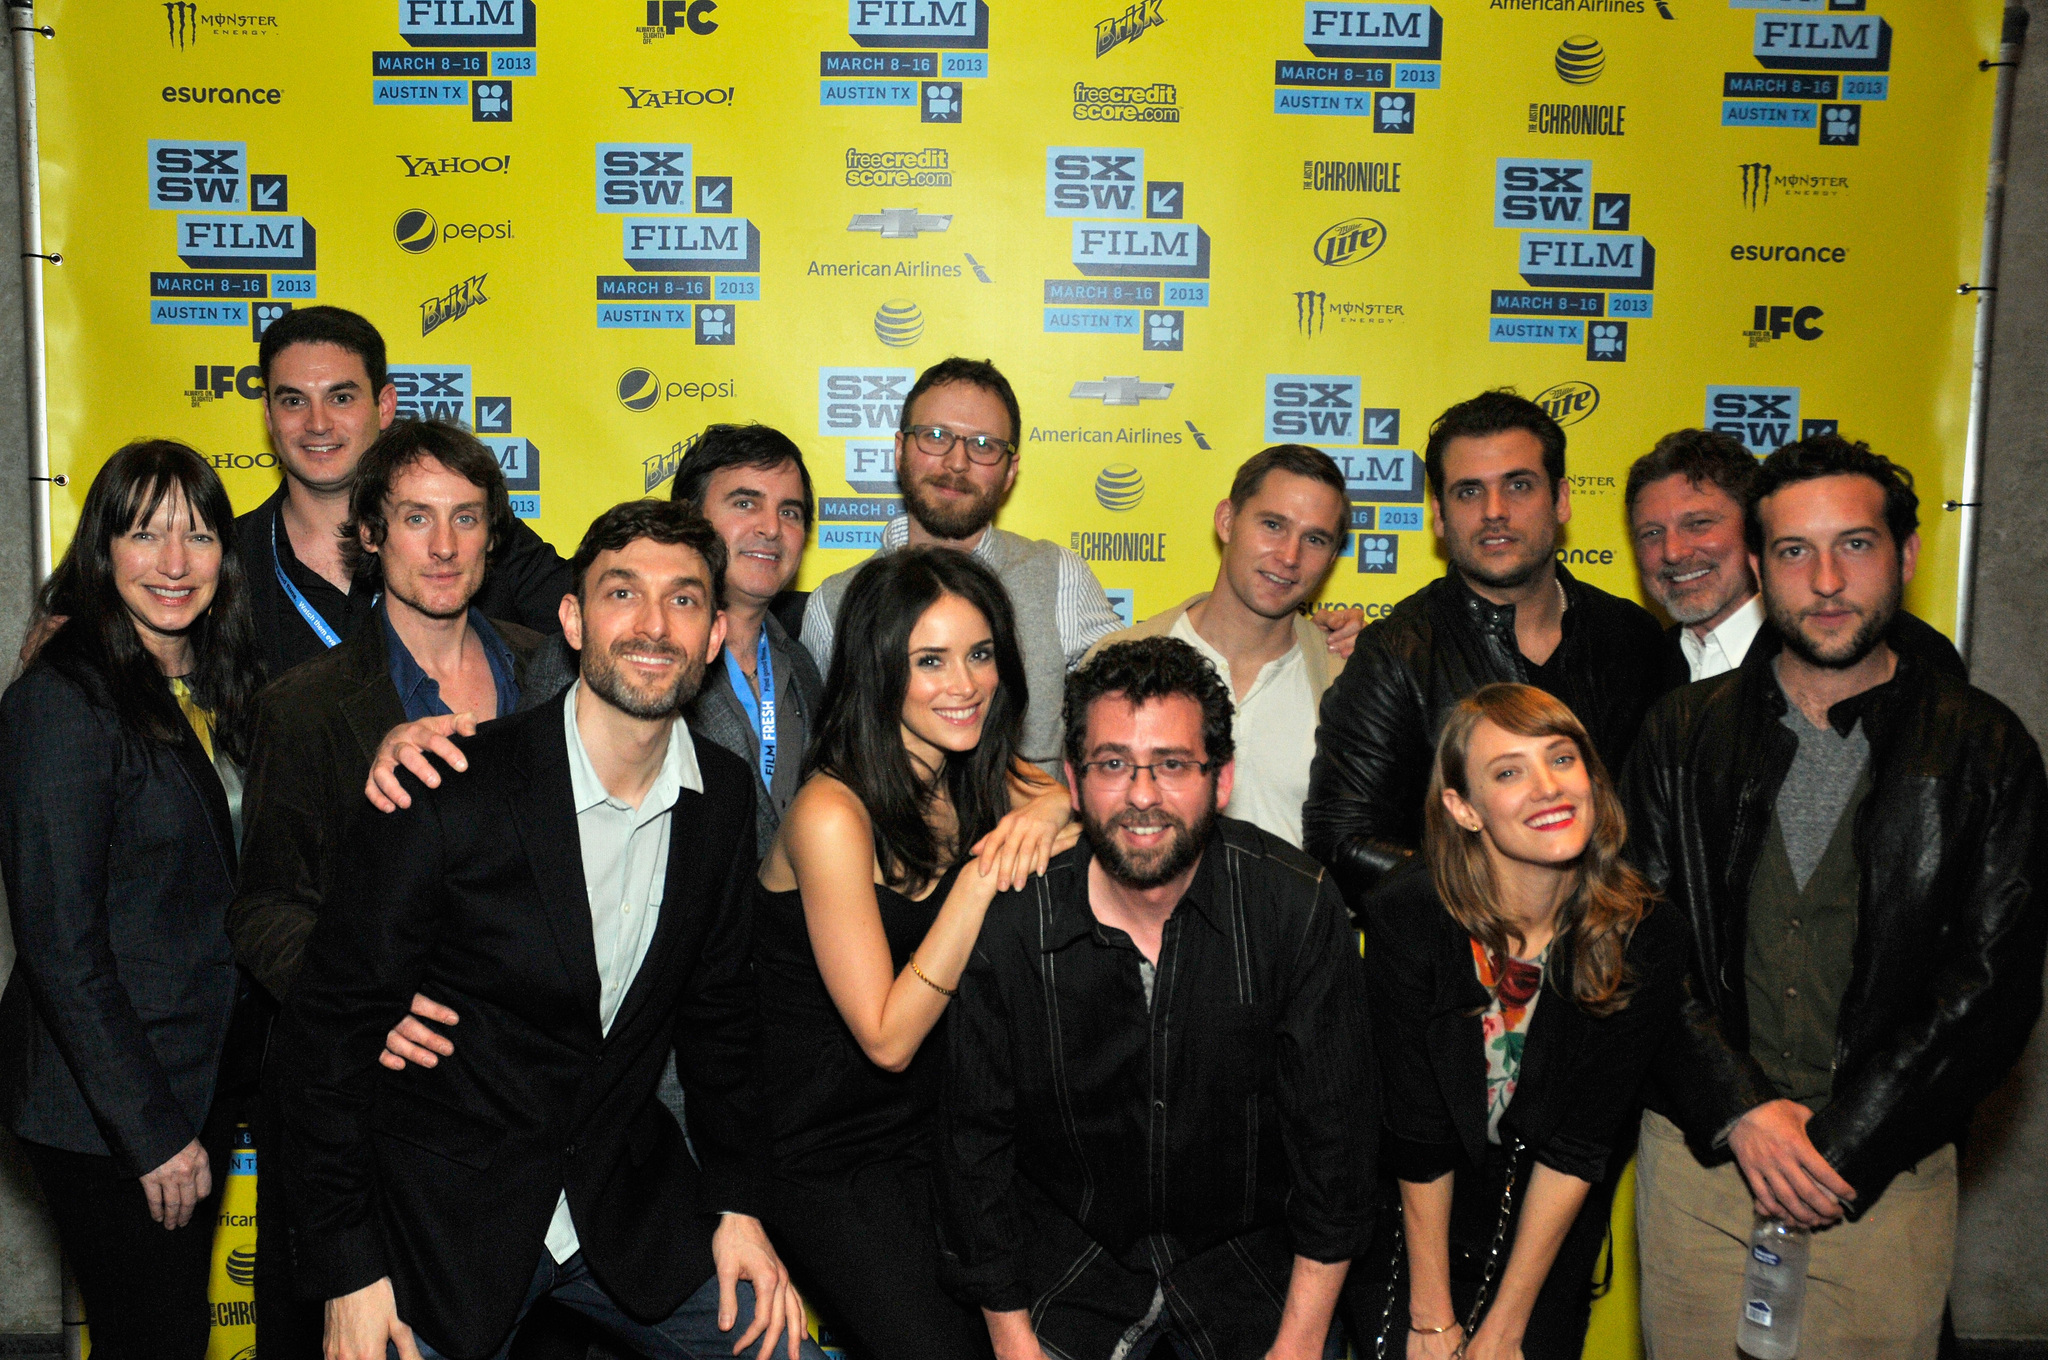 Chris Marquette, Abigail Spencer, Todd Feuer, Kwesi Collisson, Walter Strafford, Ruth Mutch, Mike Feuer, Tim Chonacas, Jason Michael Berman and Kevin Stanford at event of Kilimanjaro (2013)